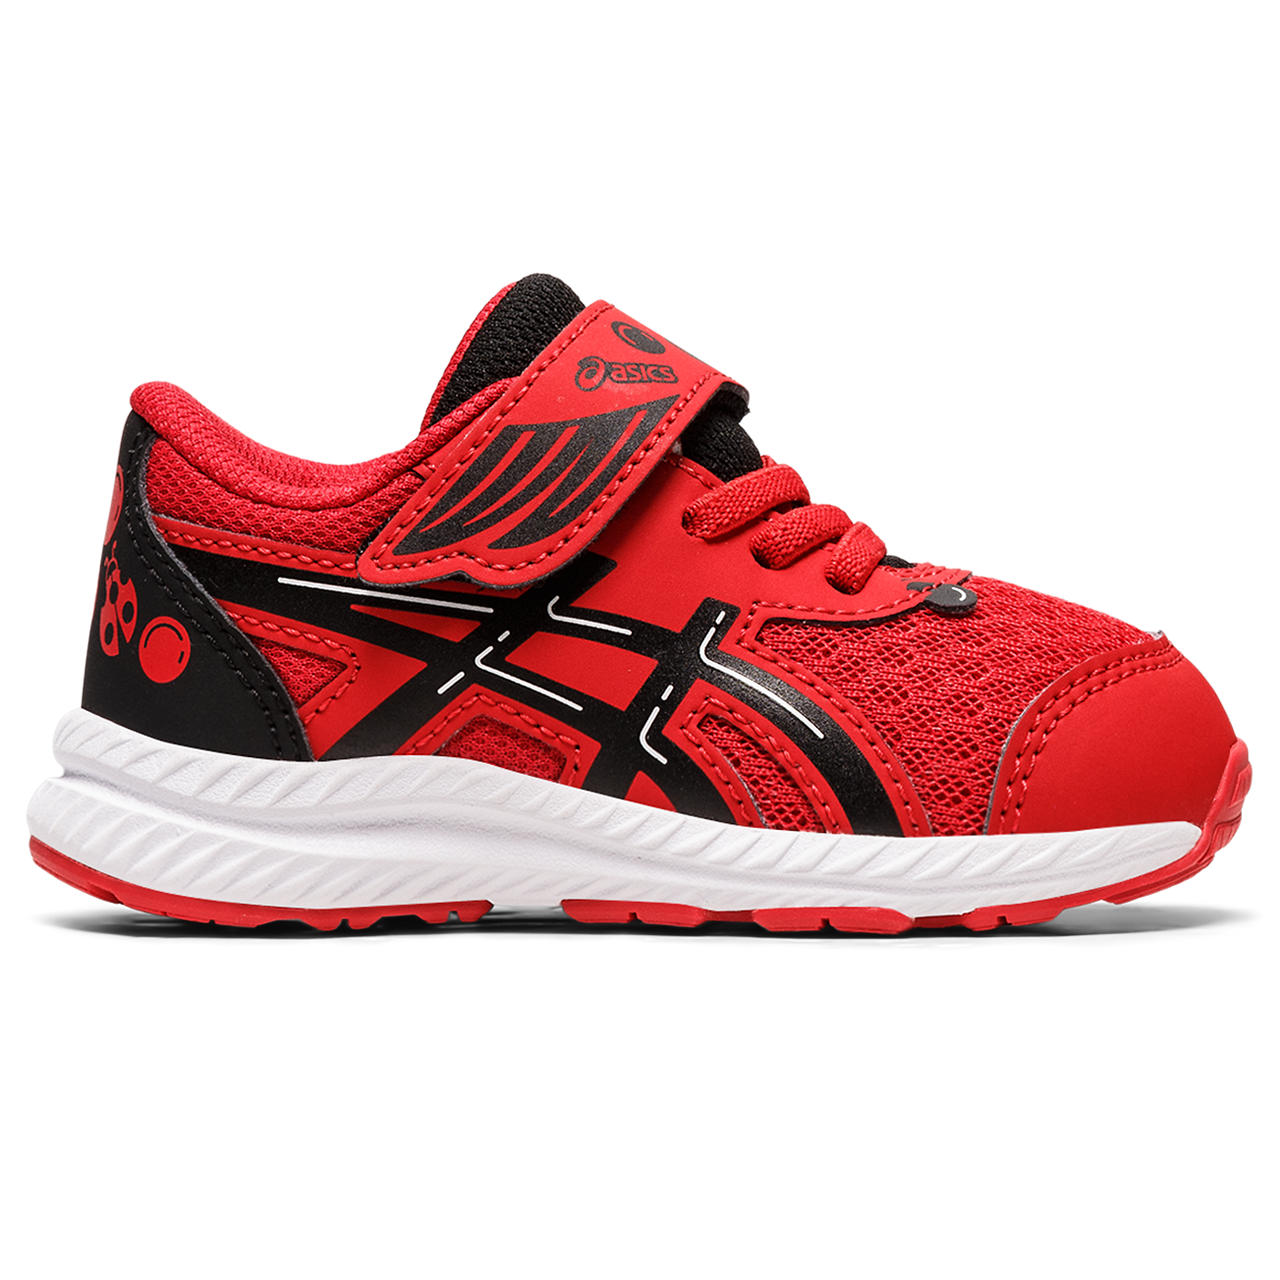 ASICS CONTEND 8 TS SCHOOL YARD image number null